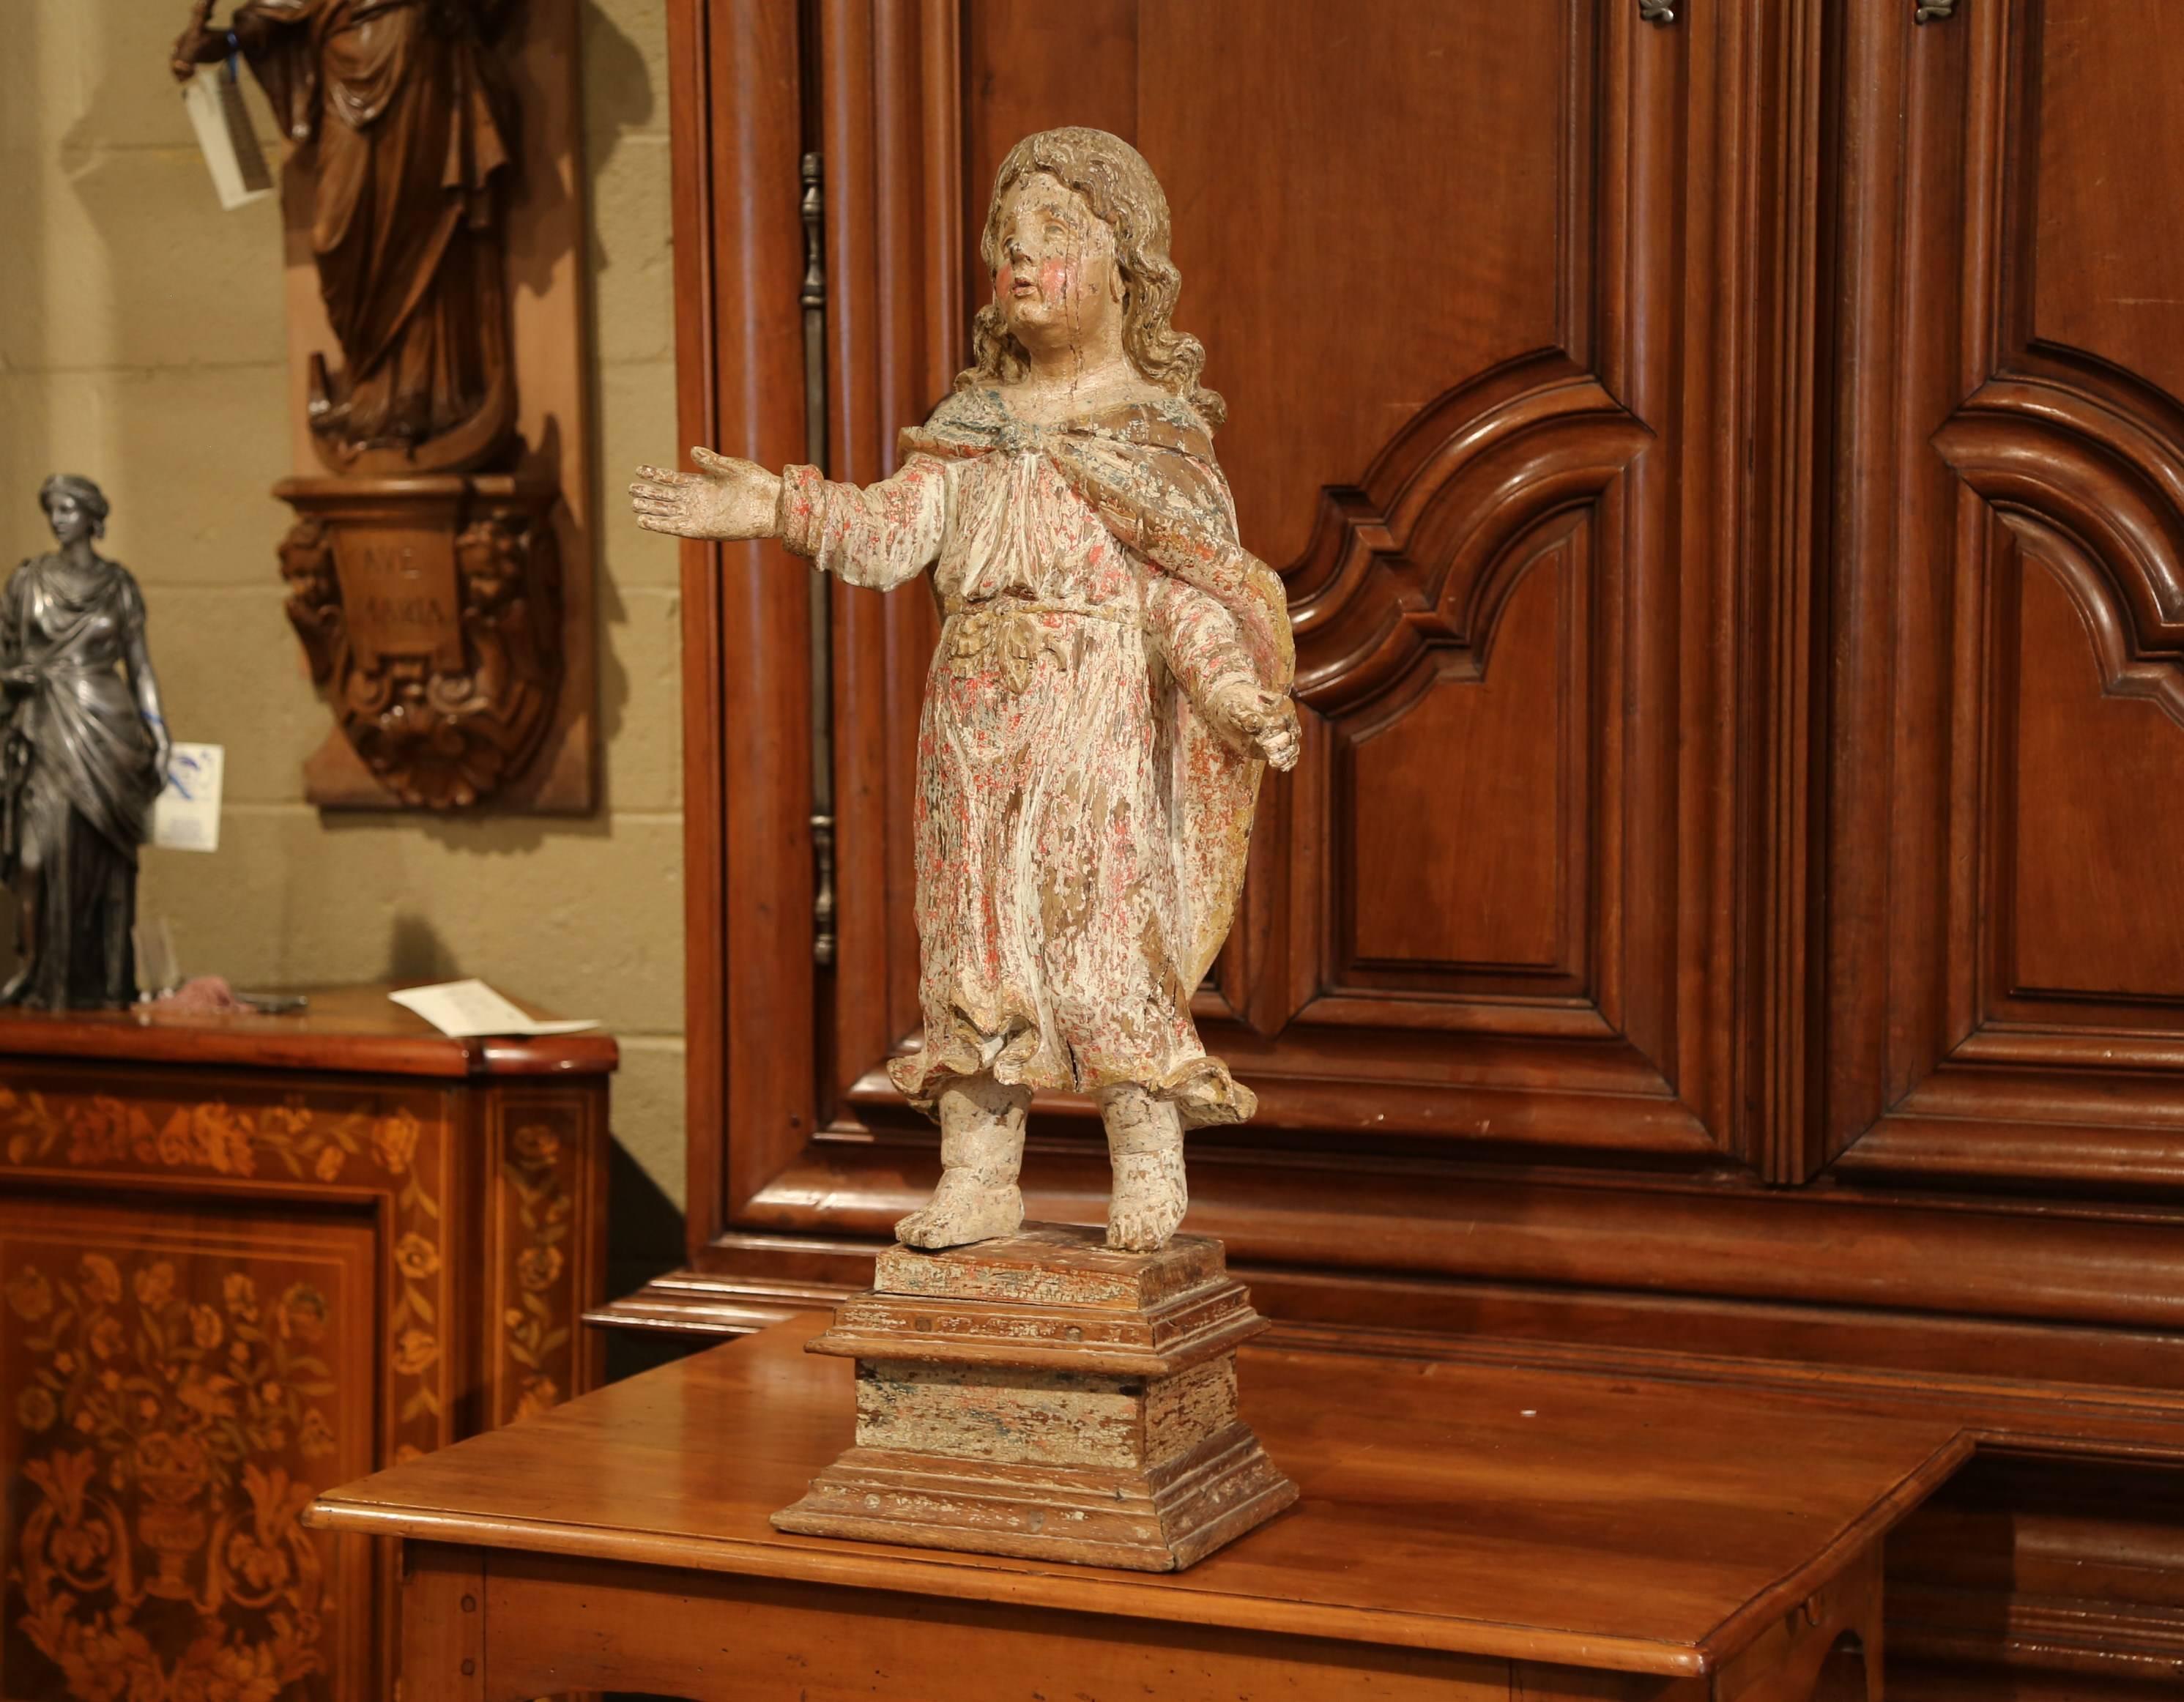 This exquisite, antique figure was carved in Southern France, circa 1650. Standing on a square walnut base, the detailed statue features a young child with long hair with a right hand up. The young adult is wearing a traditional tunic with a